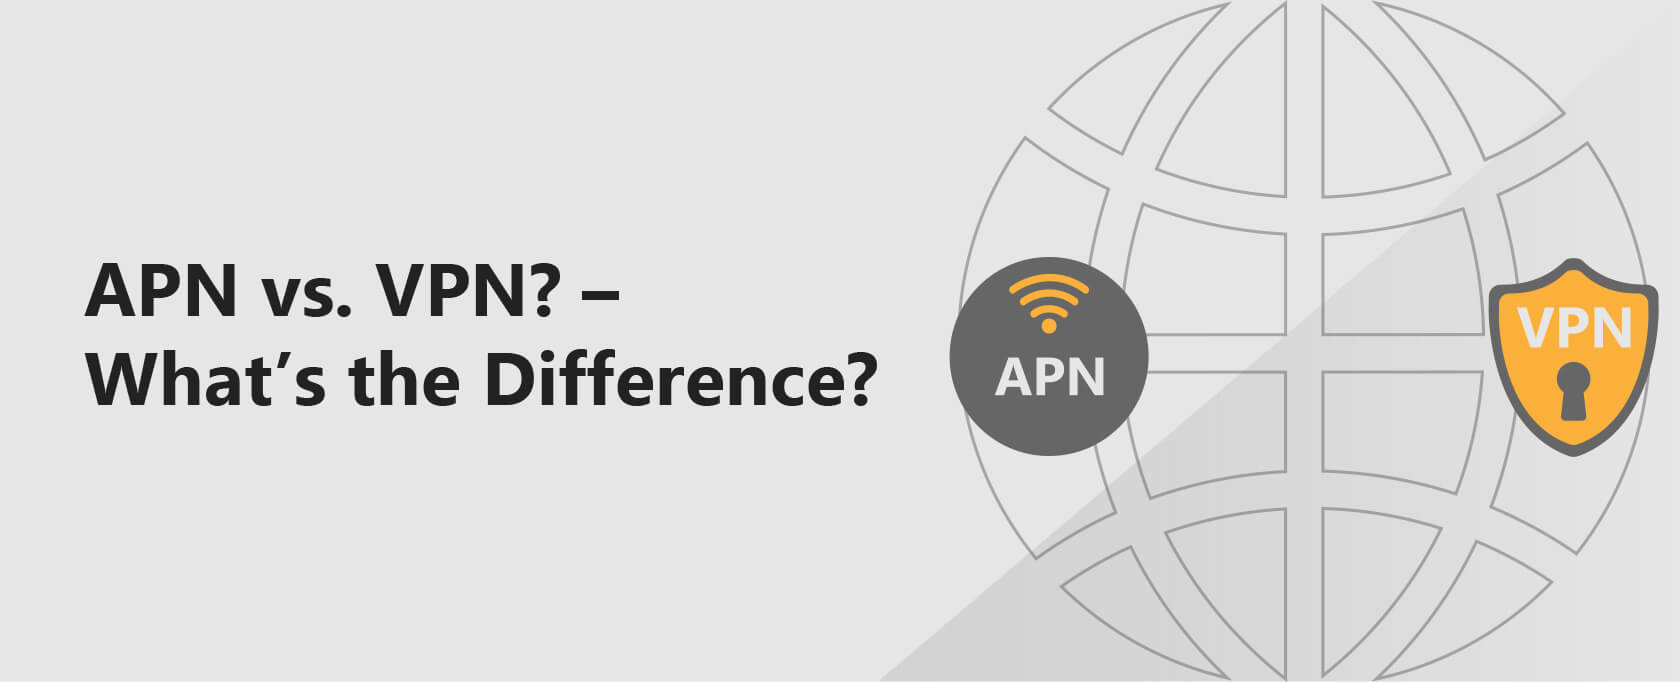 APN vs. VPN? – What’s the Difference?